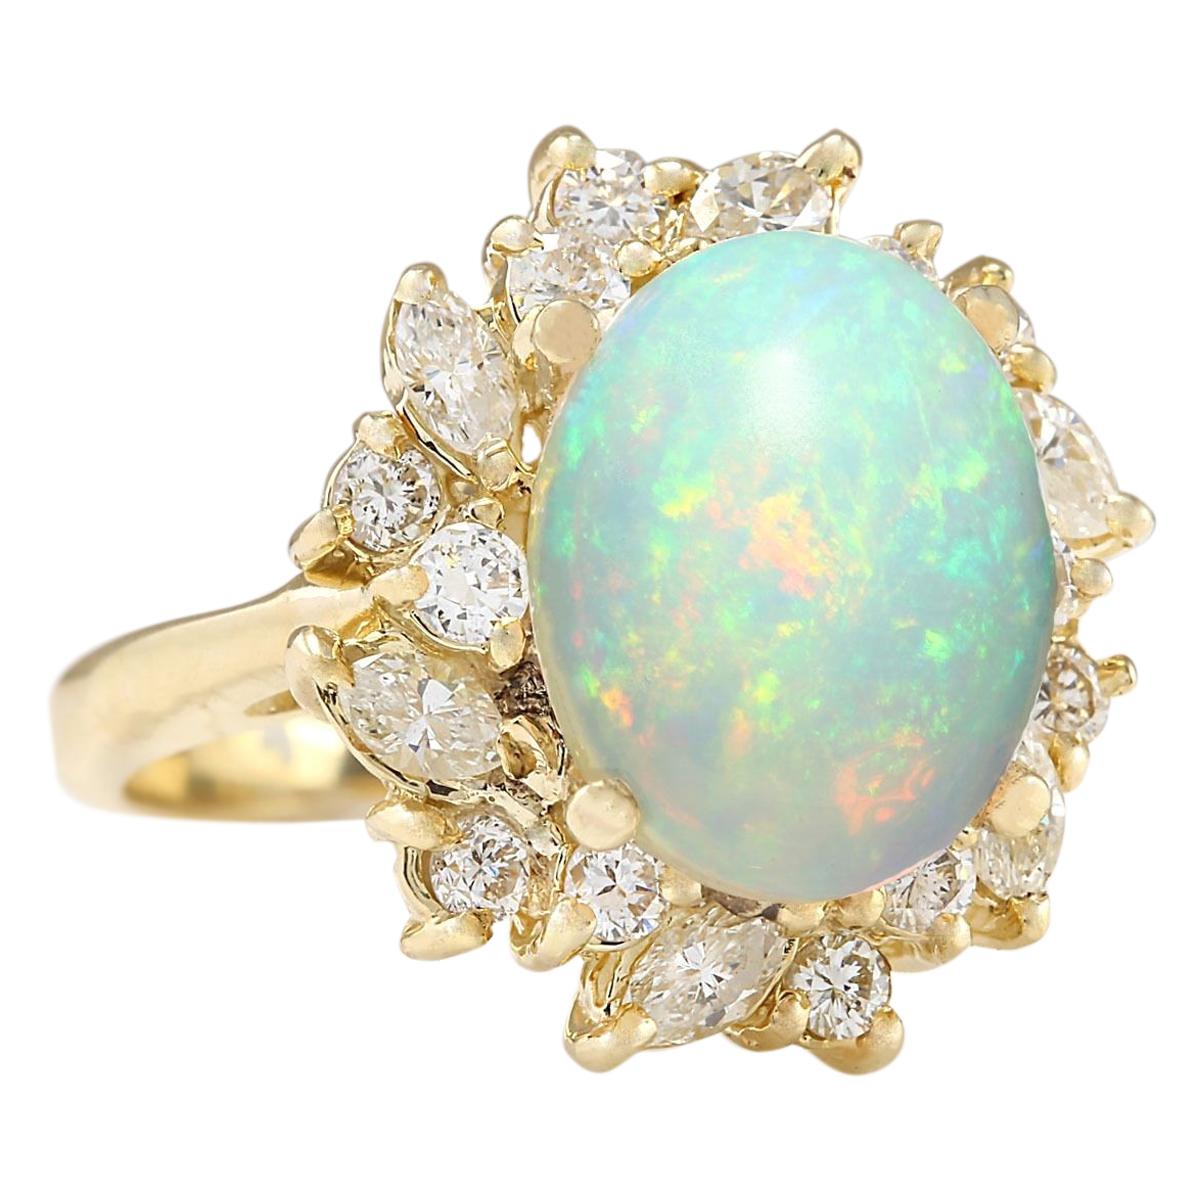 Stamped: 14K Yellow Gold
Total Ring Weight: 7.6 Grams
Total Natural Opal Weight is 3.45 Carat (Measures: 13.25x10.50 mm)
Color: Multicolor
Total Natural Diamond Weight is 1.50 Carat
Color: F-G, Clarity: VS2-SI1
Face Measures: 18.98x17.70 mm
Sku: